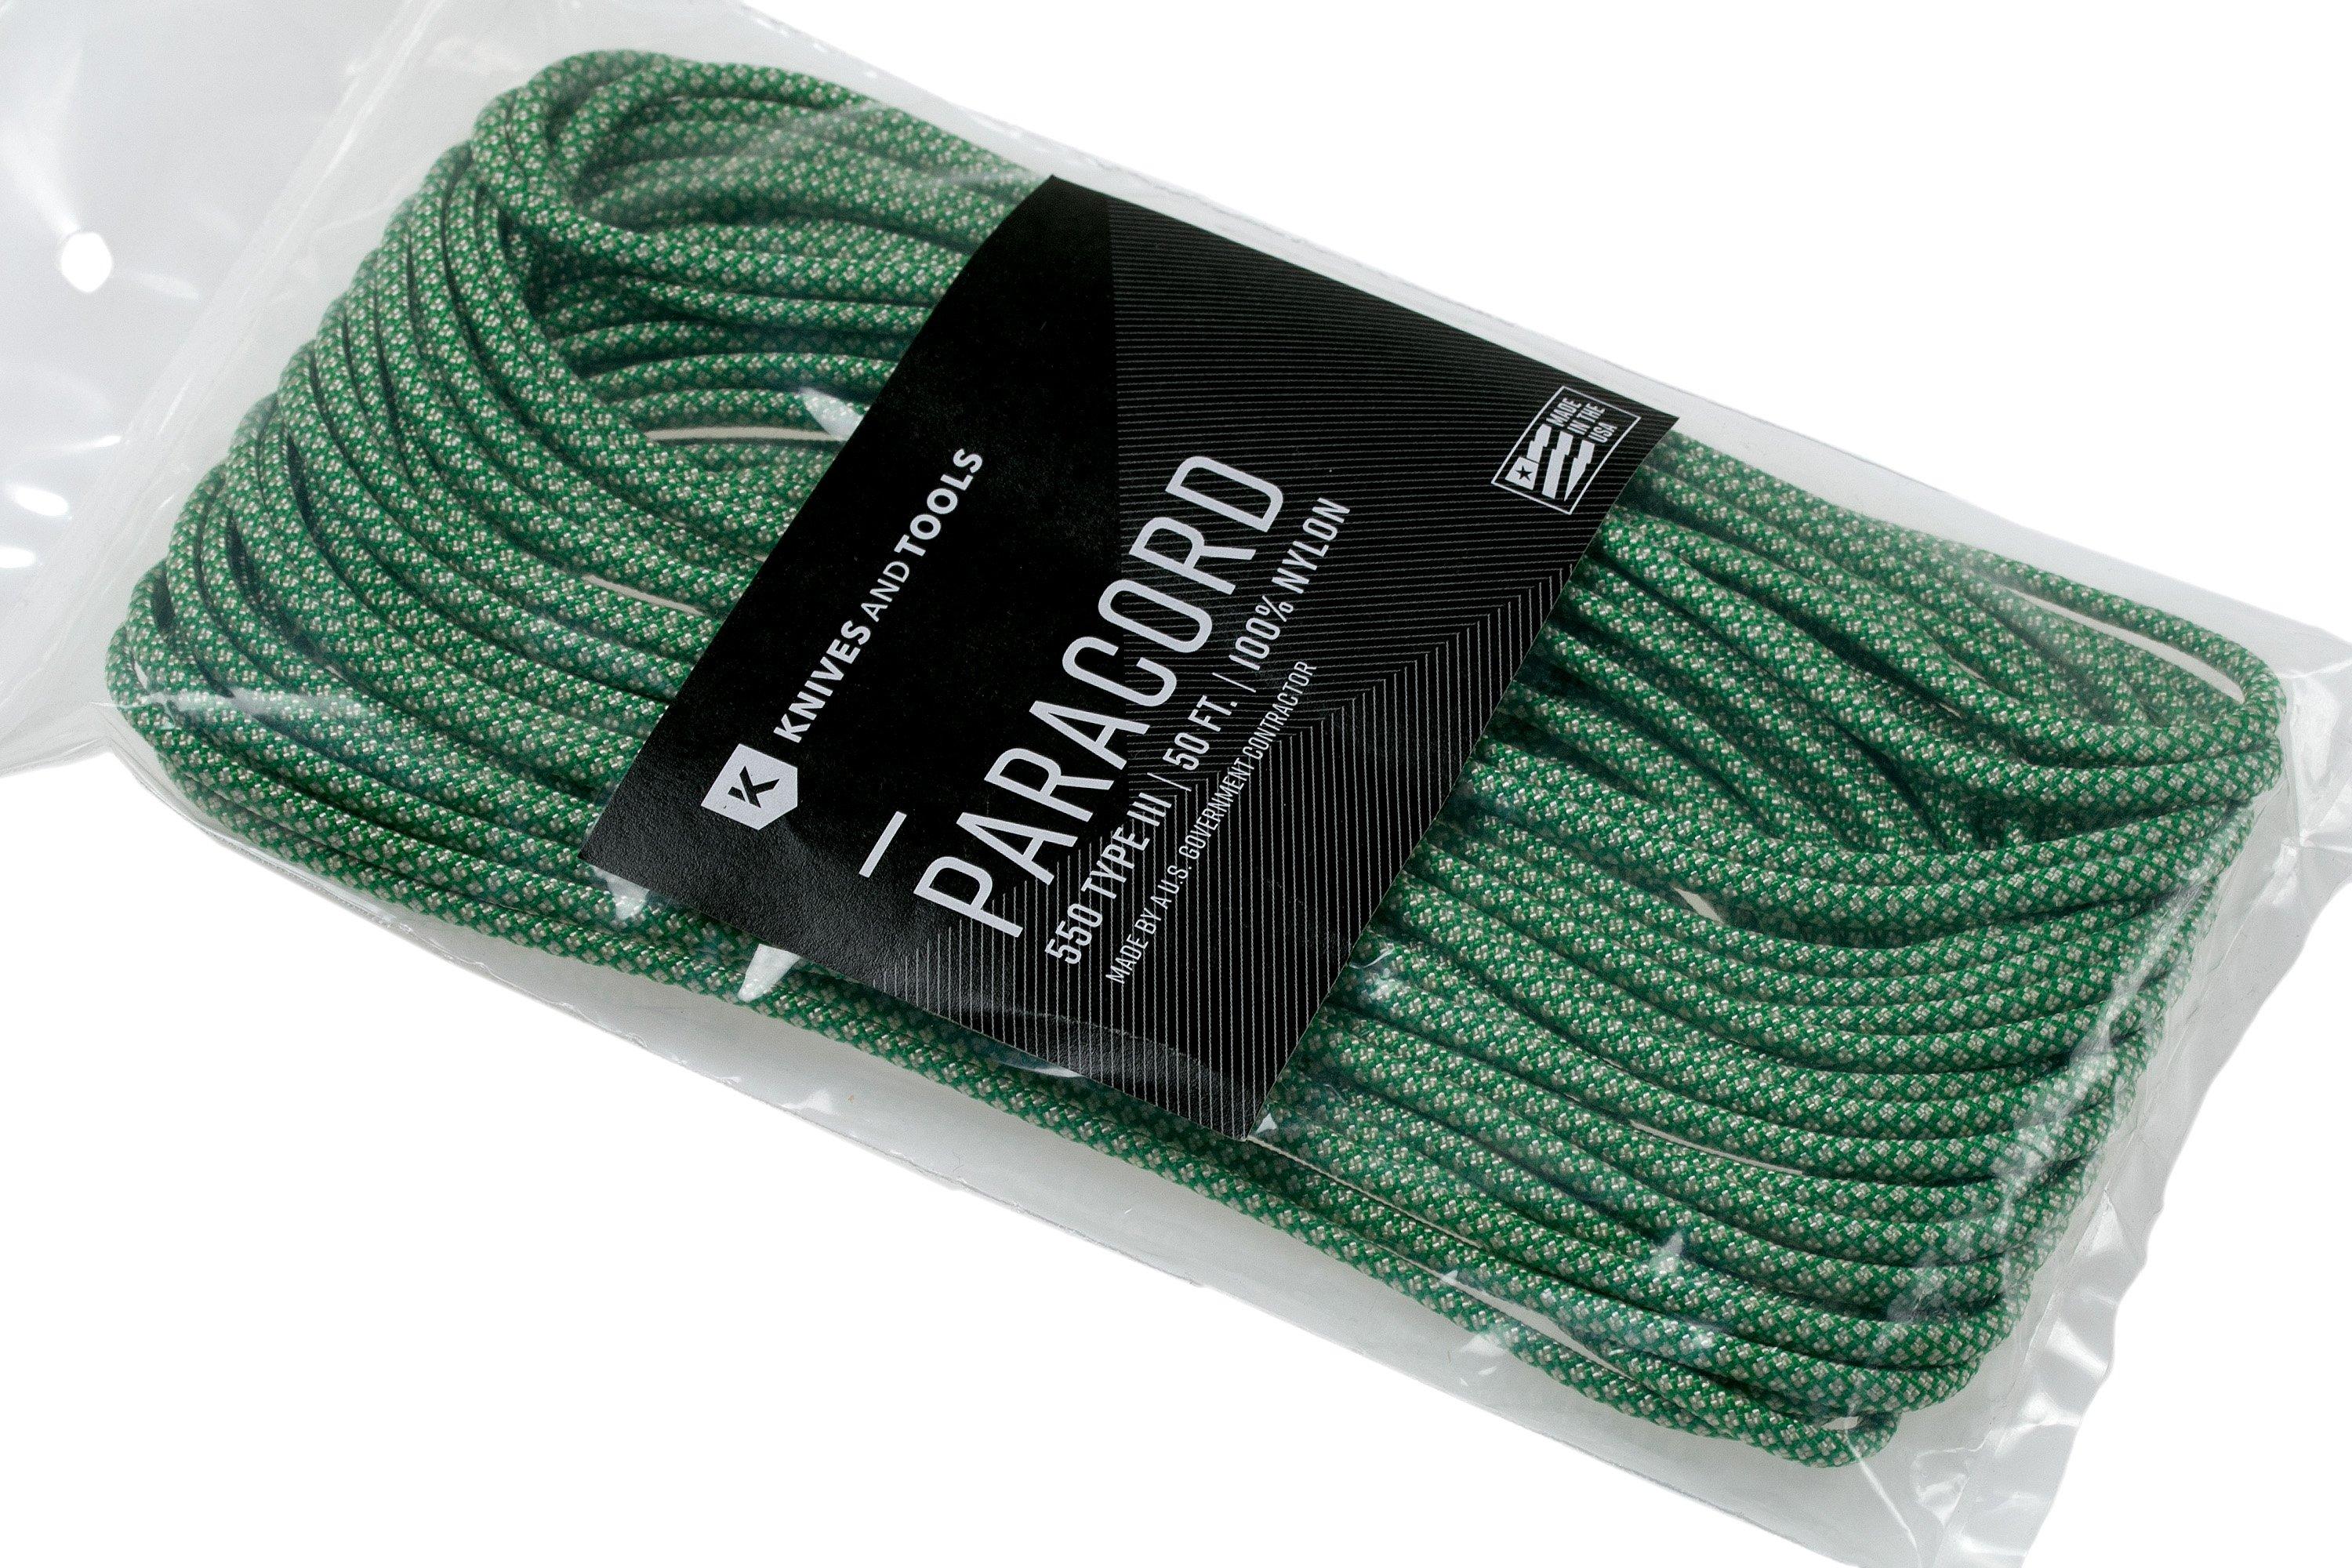 Knivesandtools 550 paracord type III colour: kelly green with